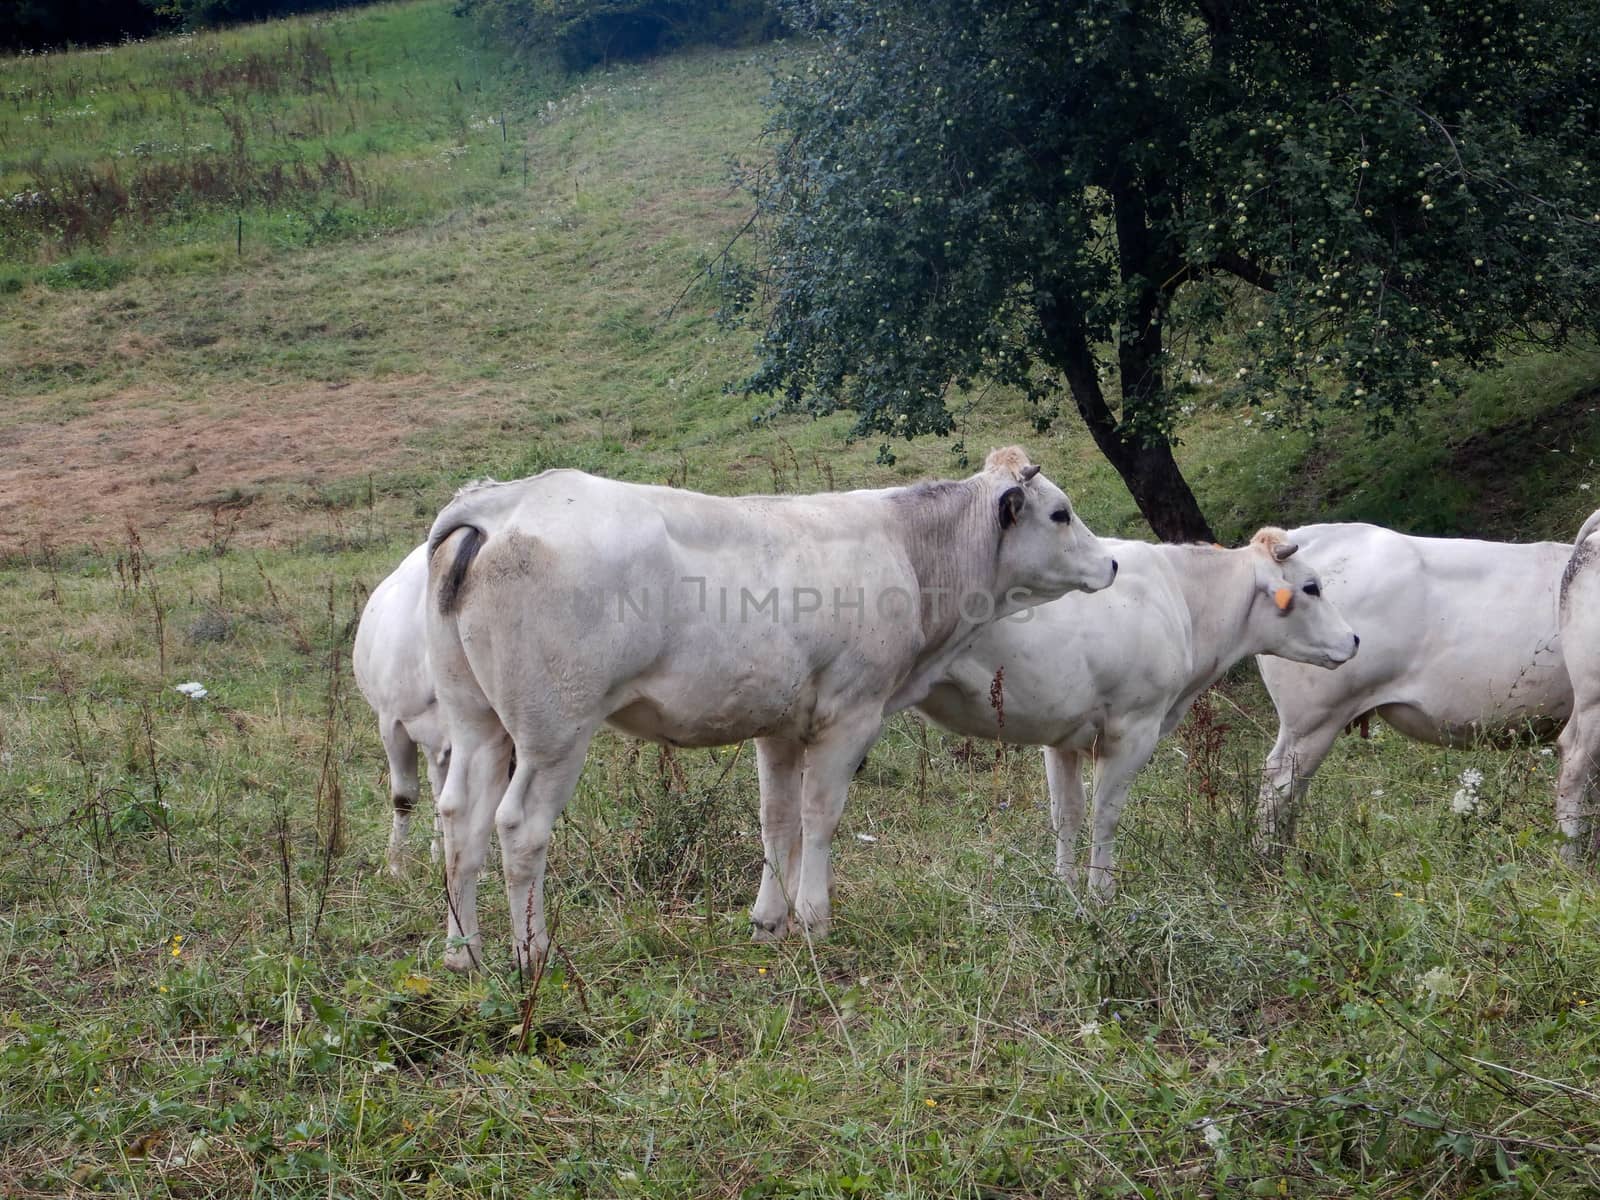 Cows grazing free in a field, Piedmont - Italy by cosca